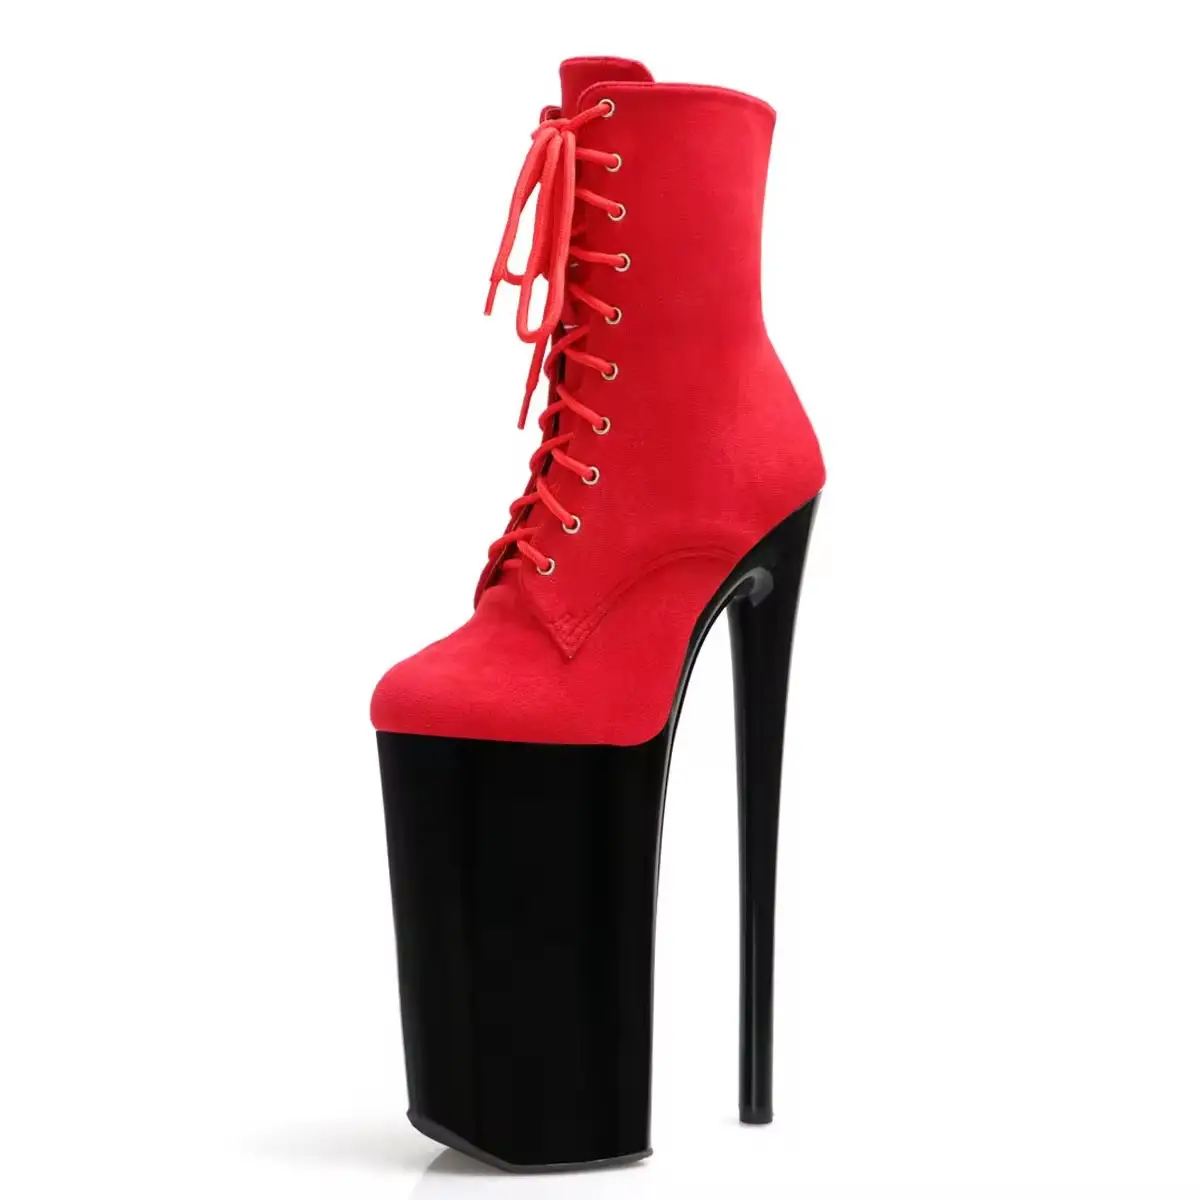 10inch-26cm Round Toe Red Flock Lace Up Ankle Boots Women's Strip Pole Dance Fashion Queen Exotic Dancer Sexy Fetish Shoes Model